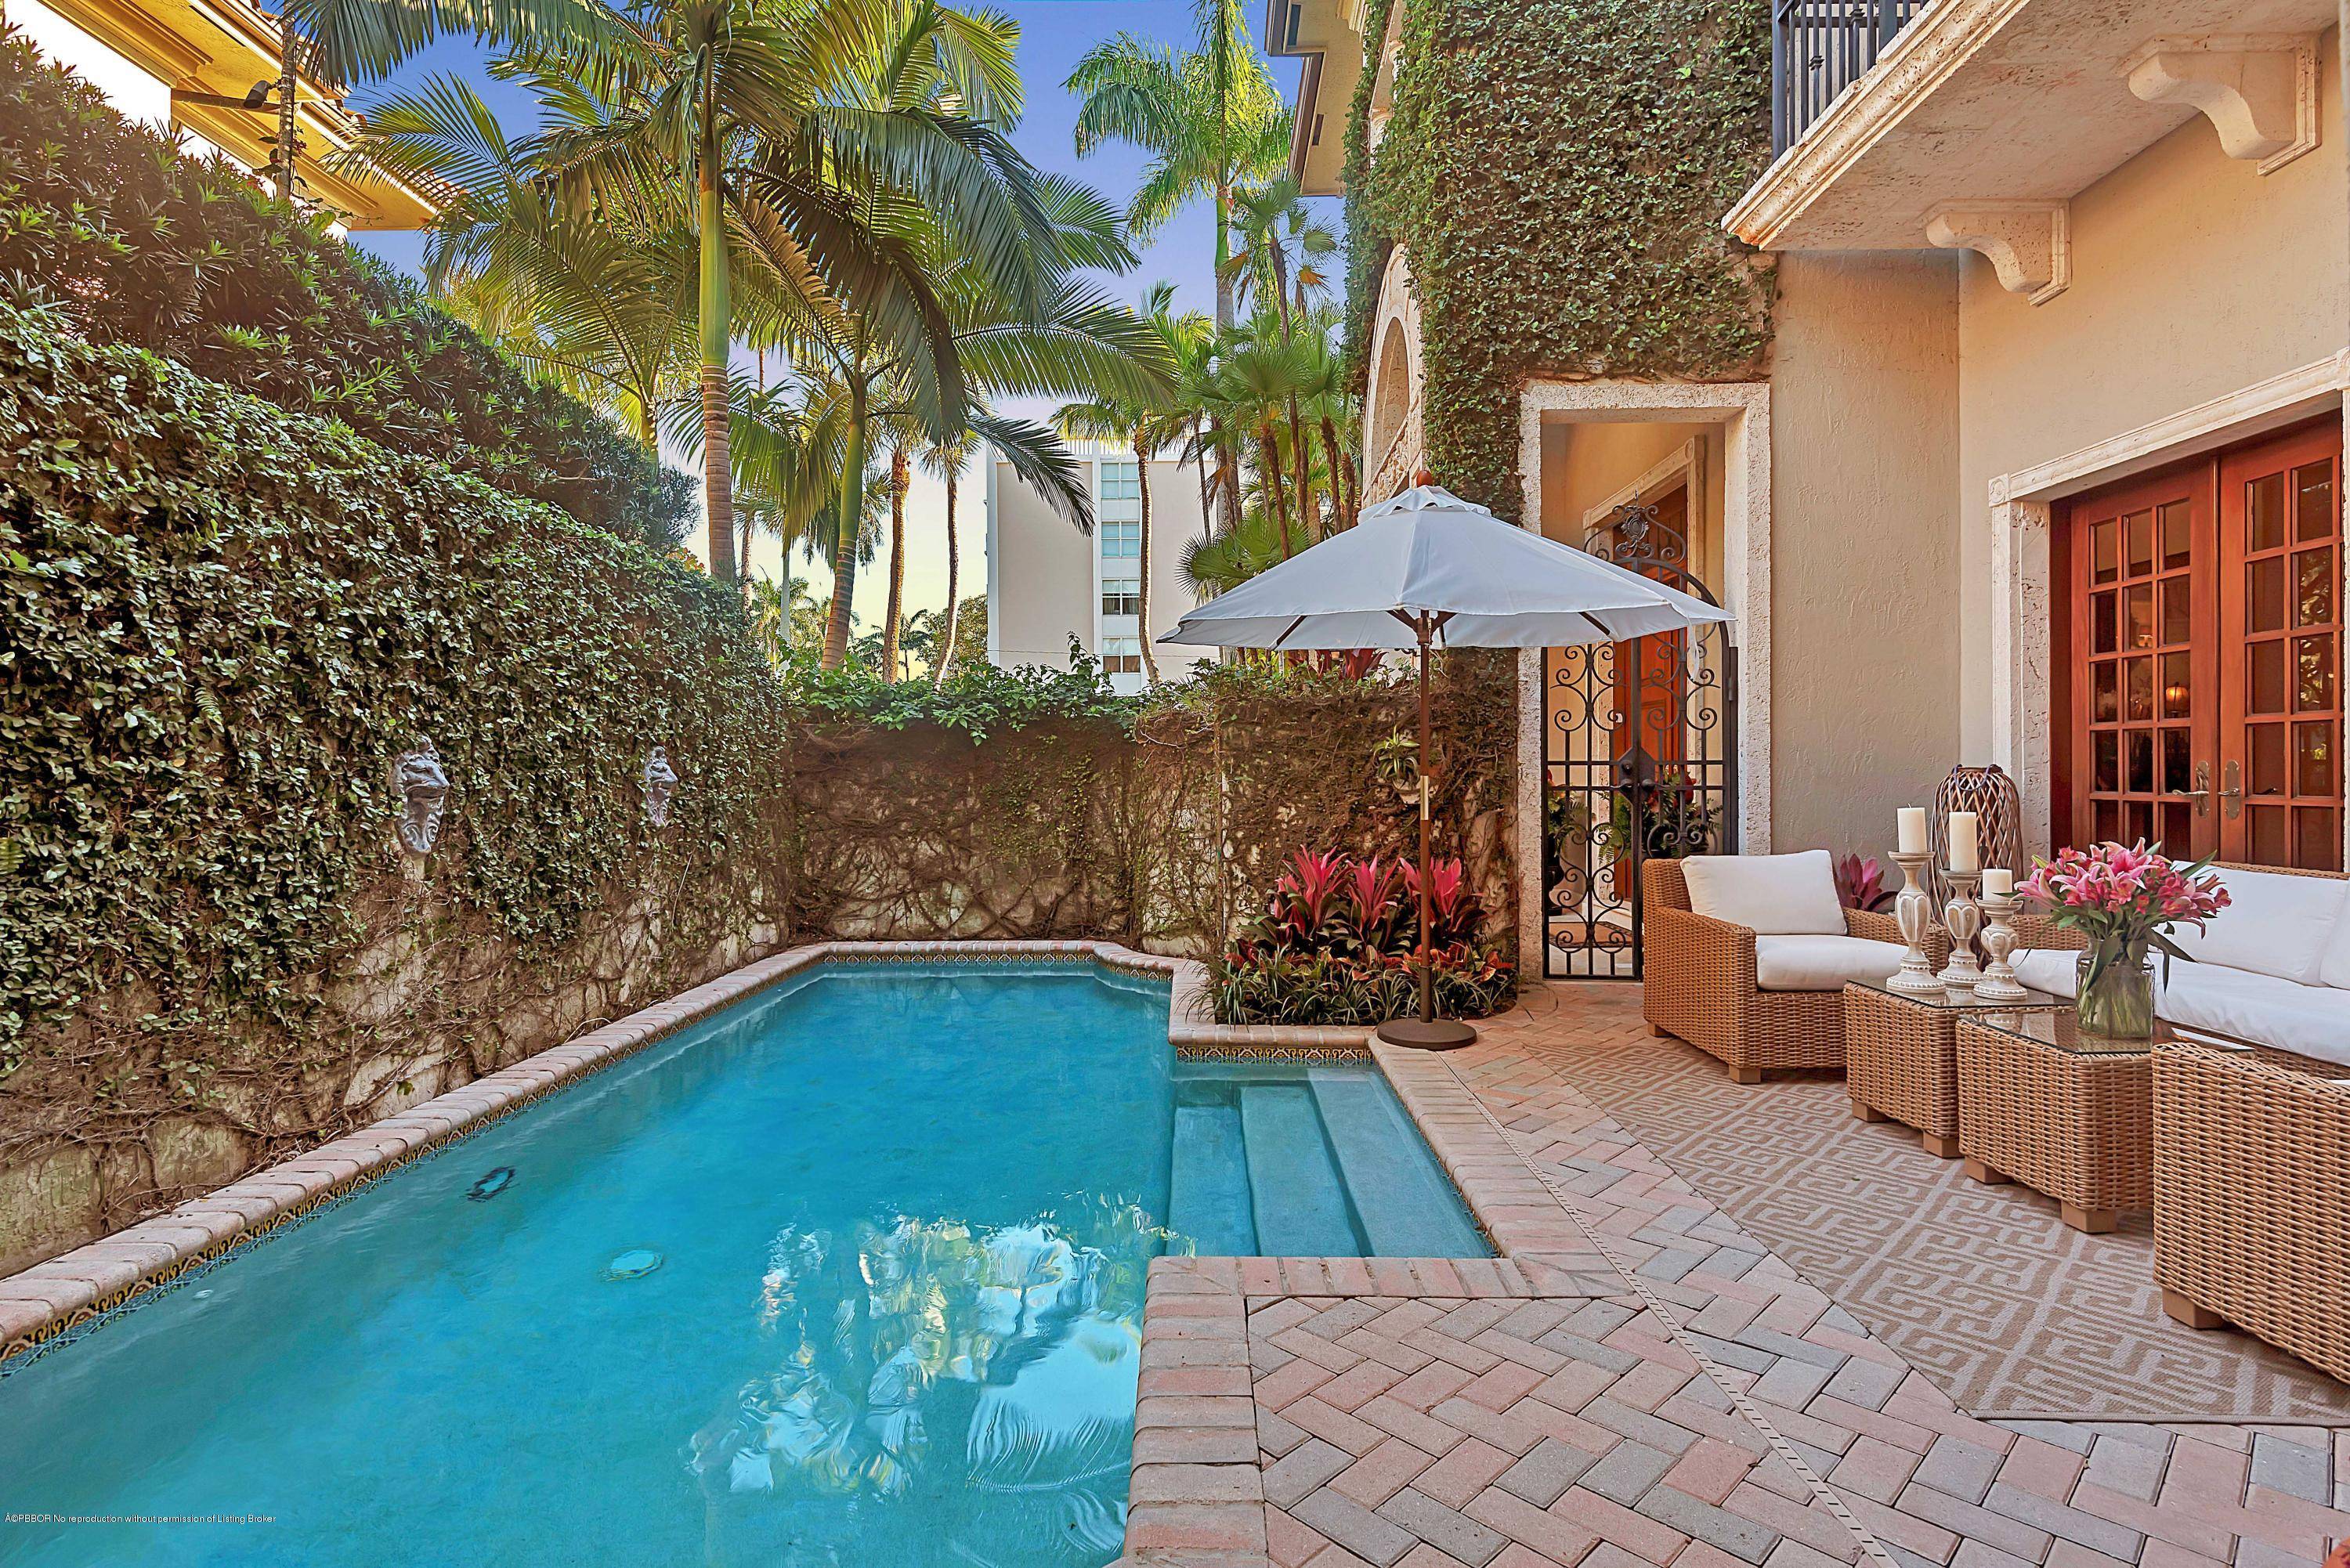 Just beyond the iron gate is a rare opportunity to own an outstanding townhouse on one of the best streets in Palm Beach.